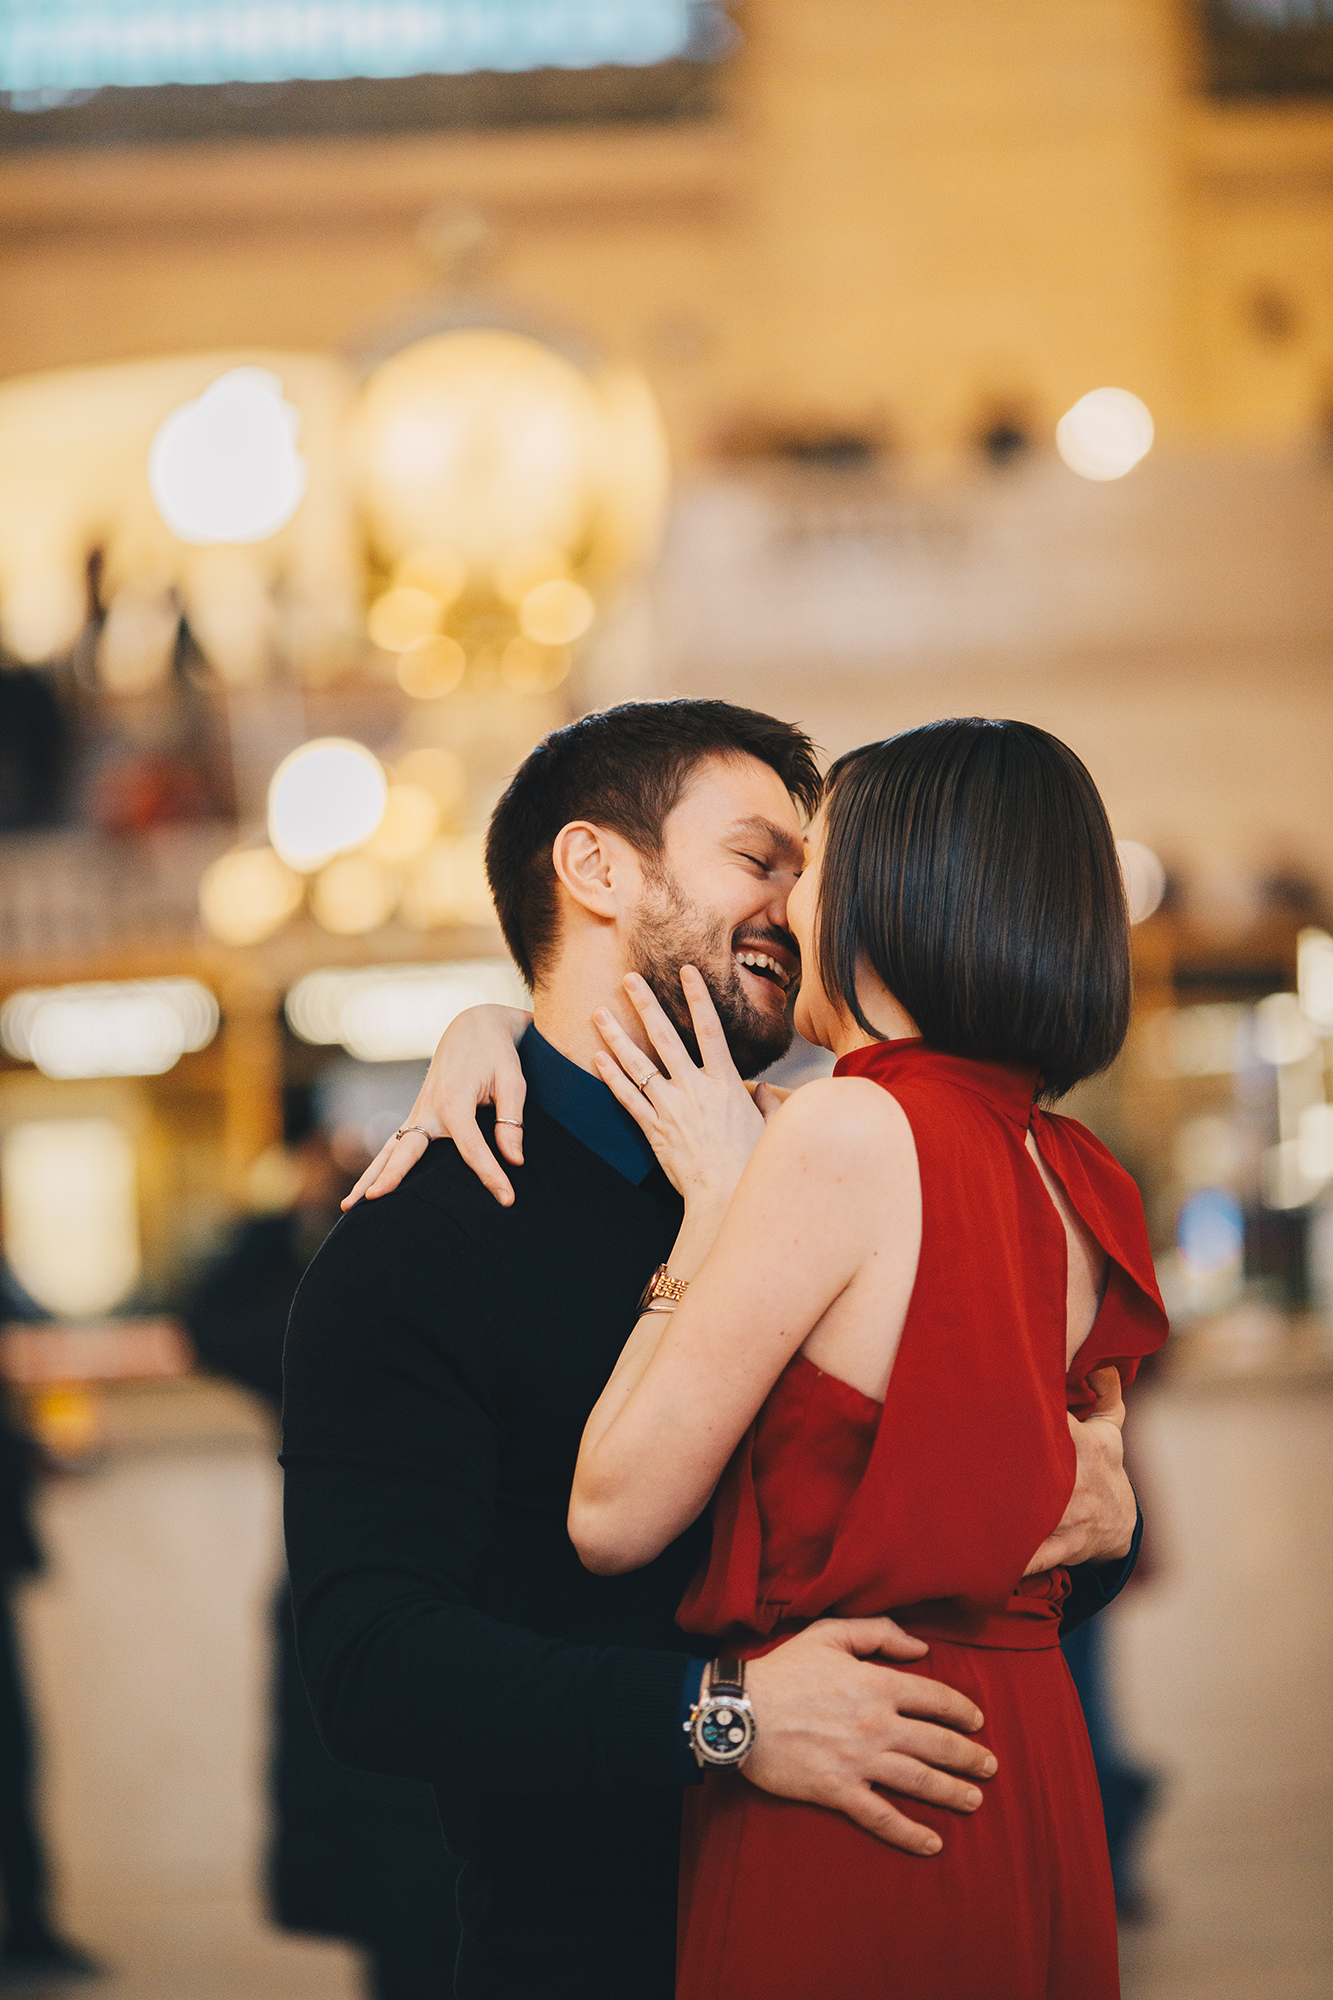 Stunning Times Square Engagement Photos and Grand Central Engagement Photography in New York